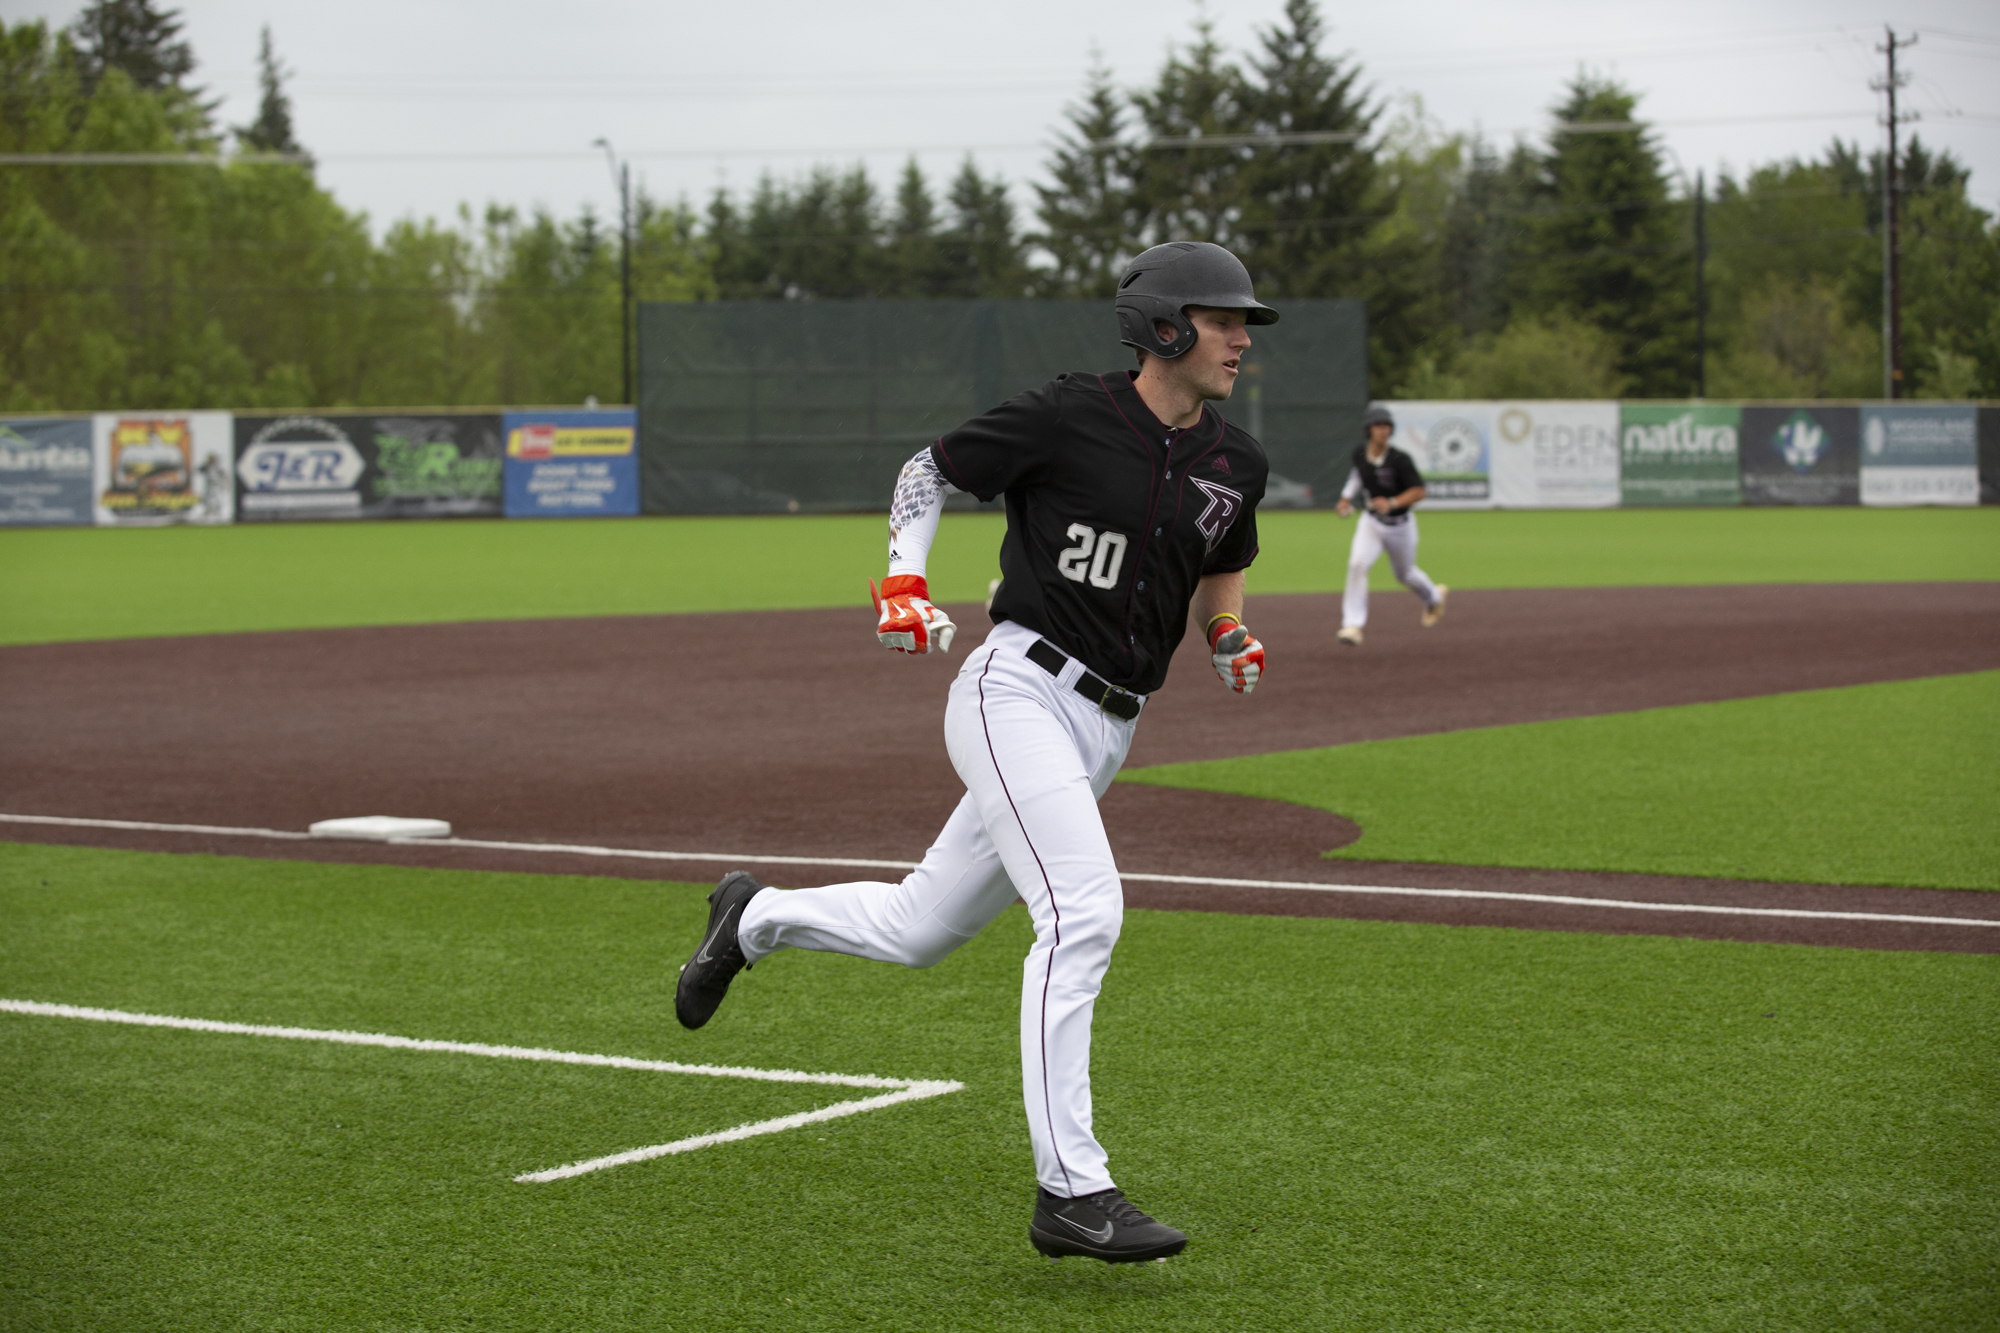 Mikey Kane of the Ridgefield Raptors rounds third base during their West Coast League season opener against the  Walla Walla Sweets at Ridgefield Outdoor Recreation Complex on Friday, June 3, 2022.